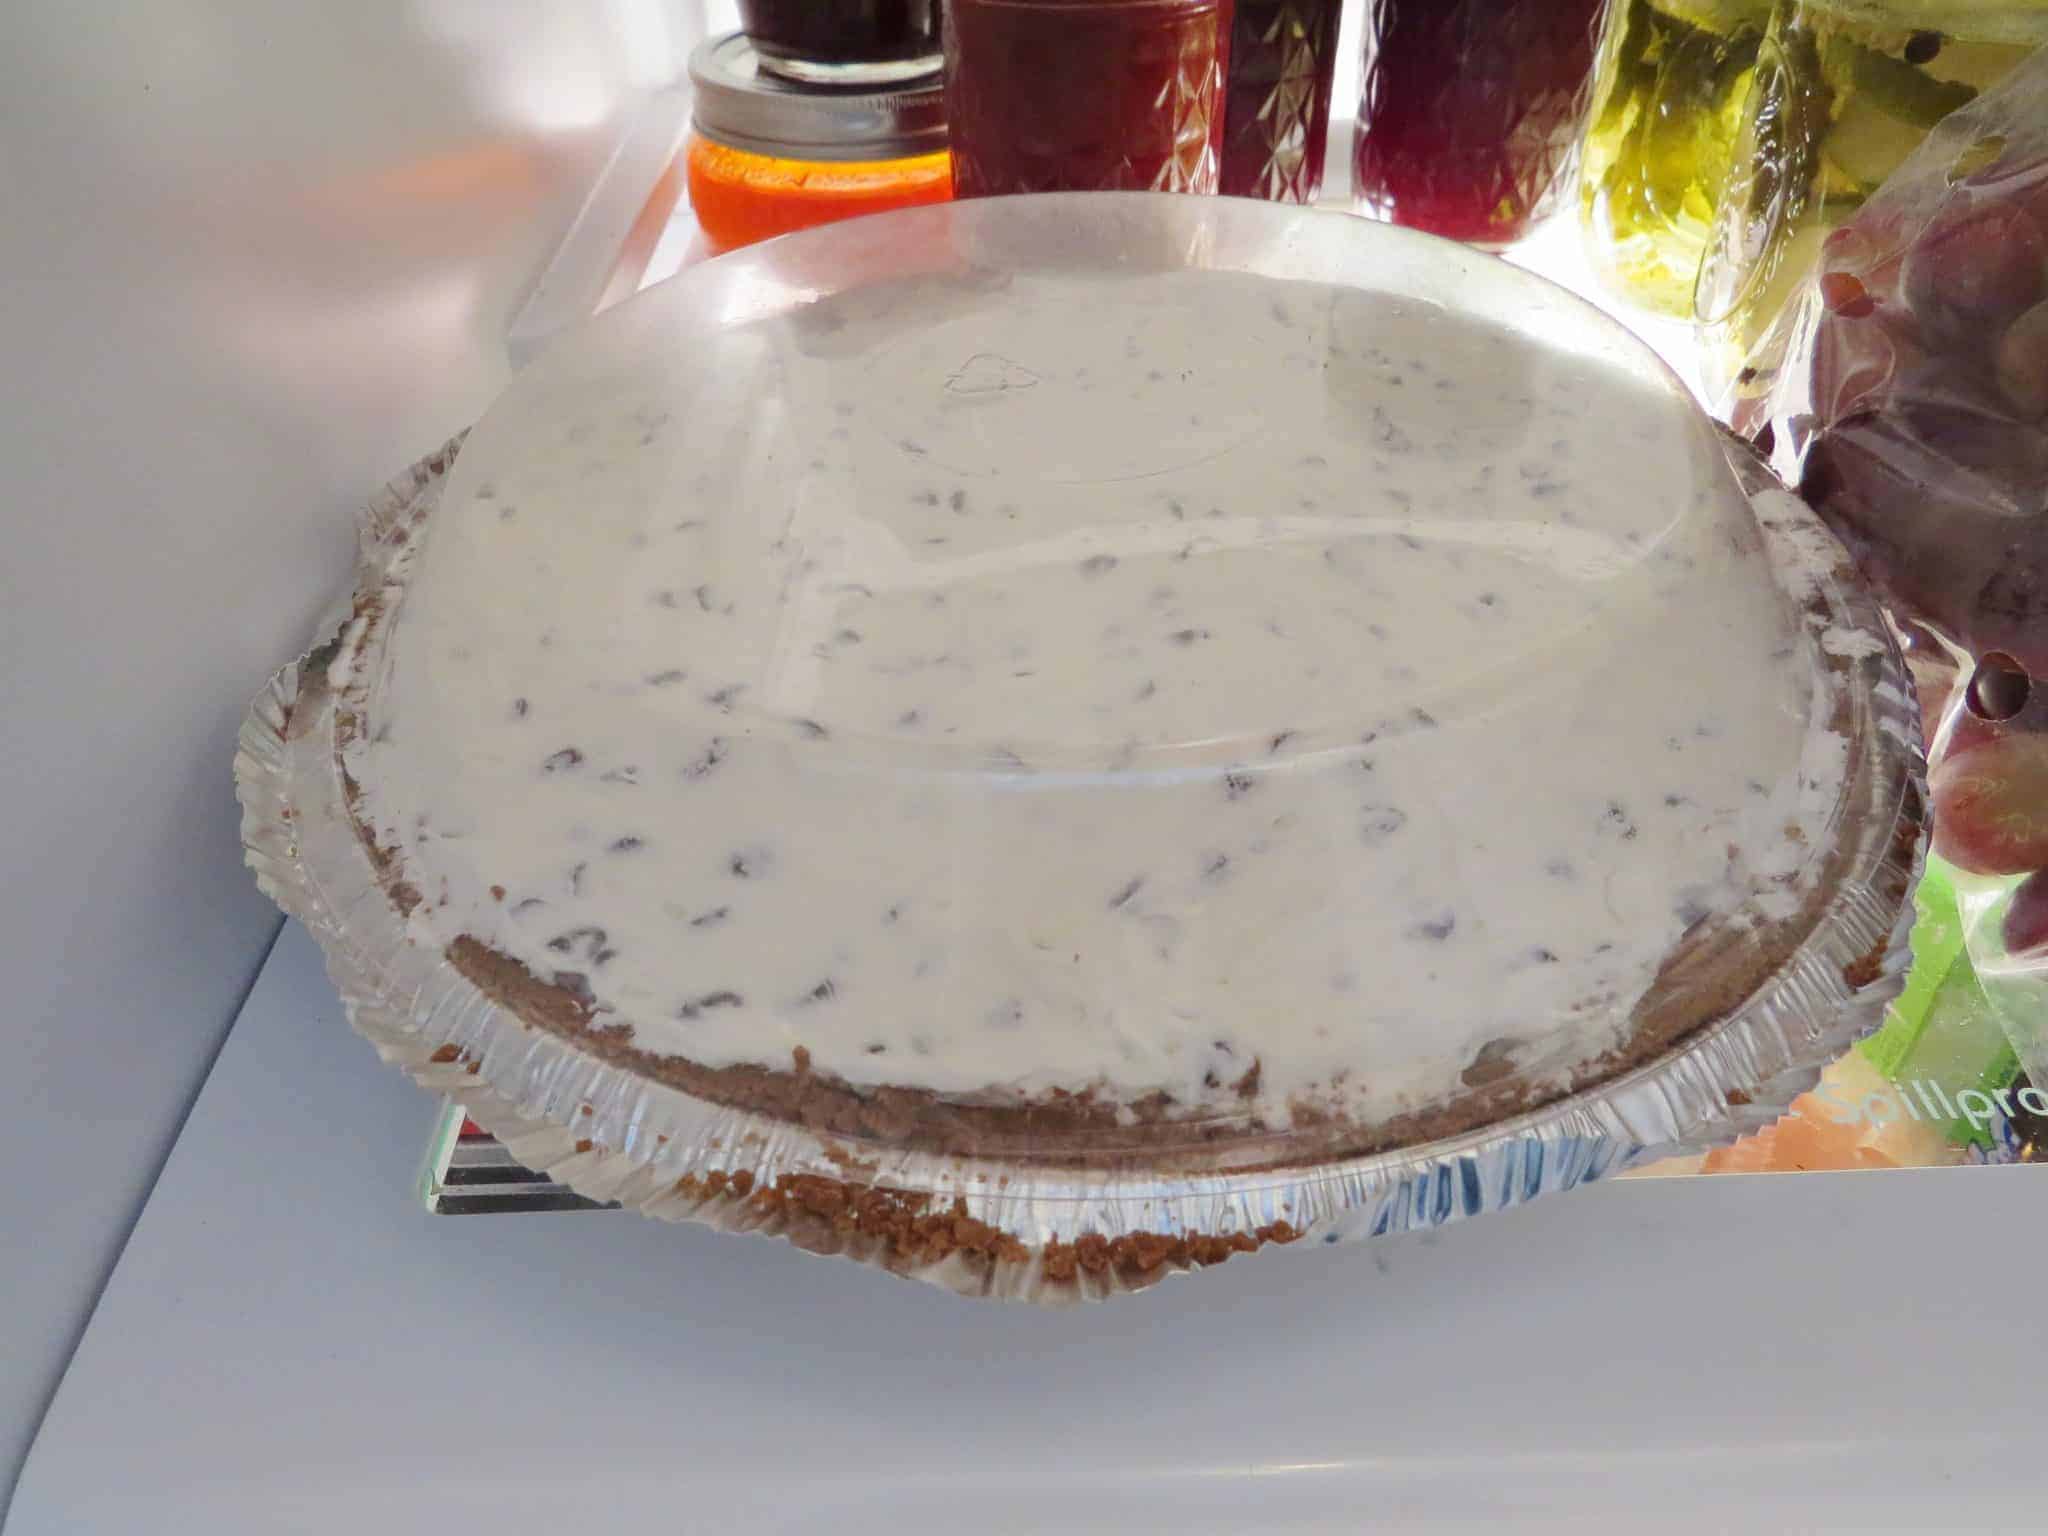 cheesecake cooling in the refrigerator.